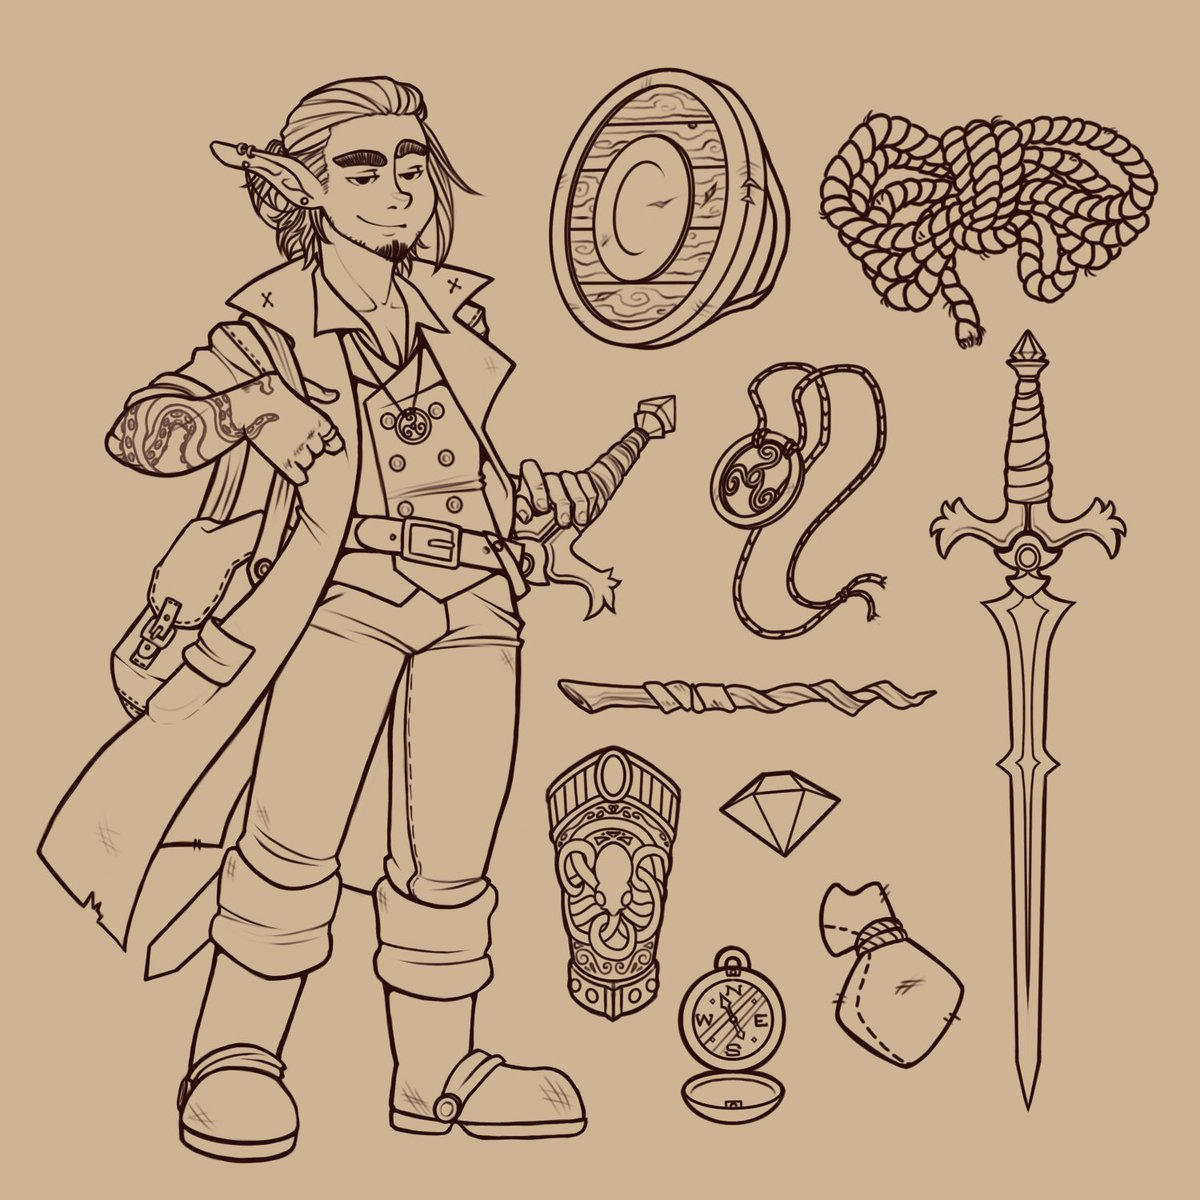 I’ve already put 7.5 hours into this lmao why do I do this to myself. :’) Asher and some of his gear 😍 #dnd #dndart #holysymbol #trithereon #wandoflightningbolts #halfelf #cleric